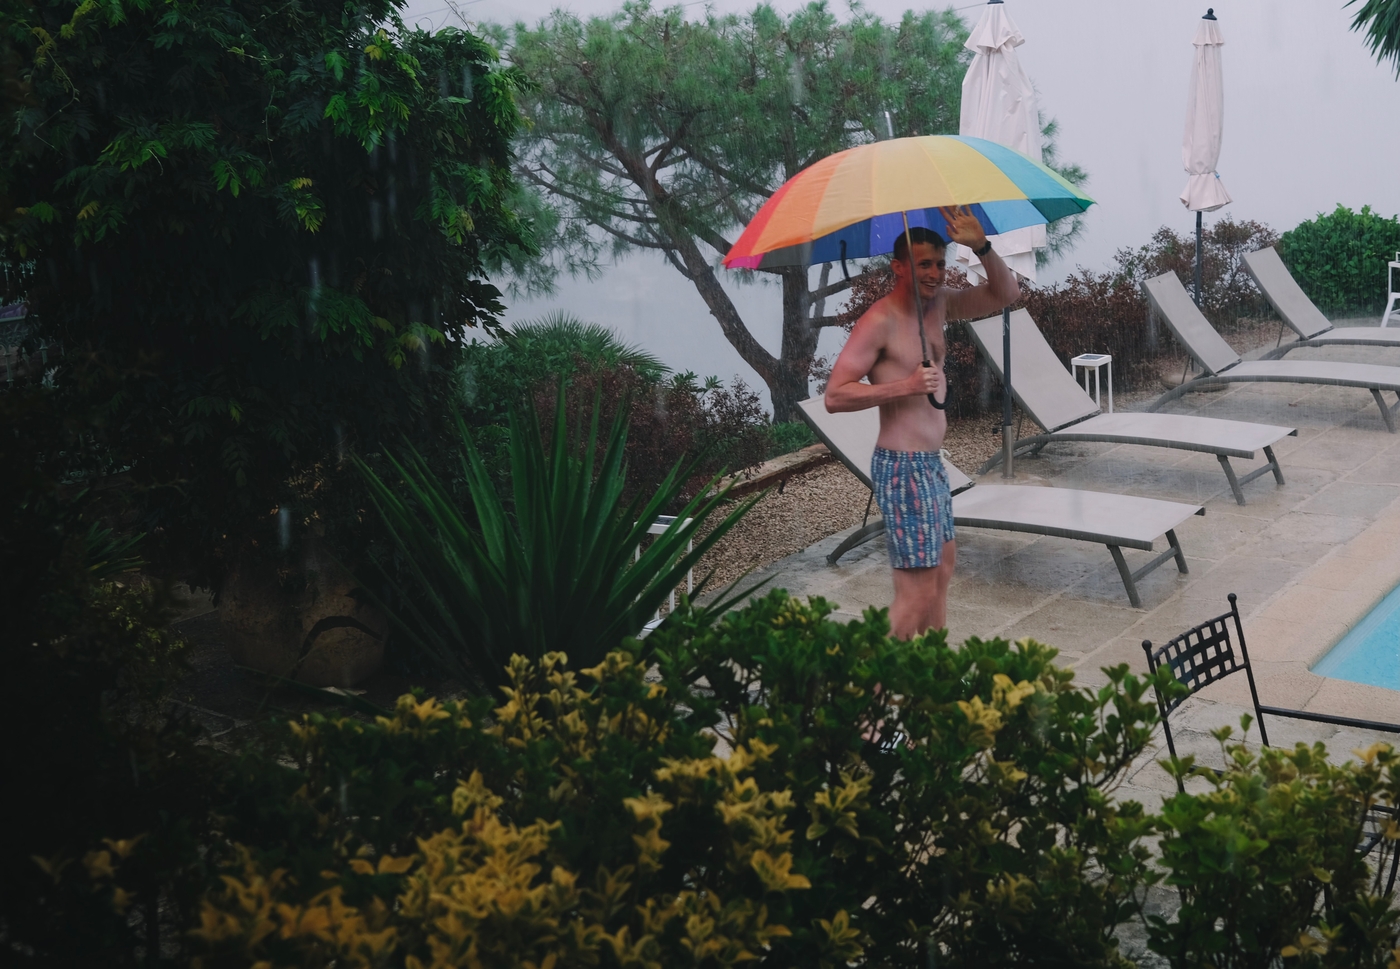 A man in swimming trunks in the pouring rain, holding an umbrella